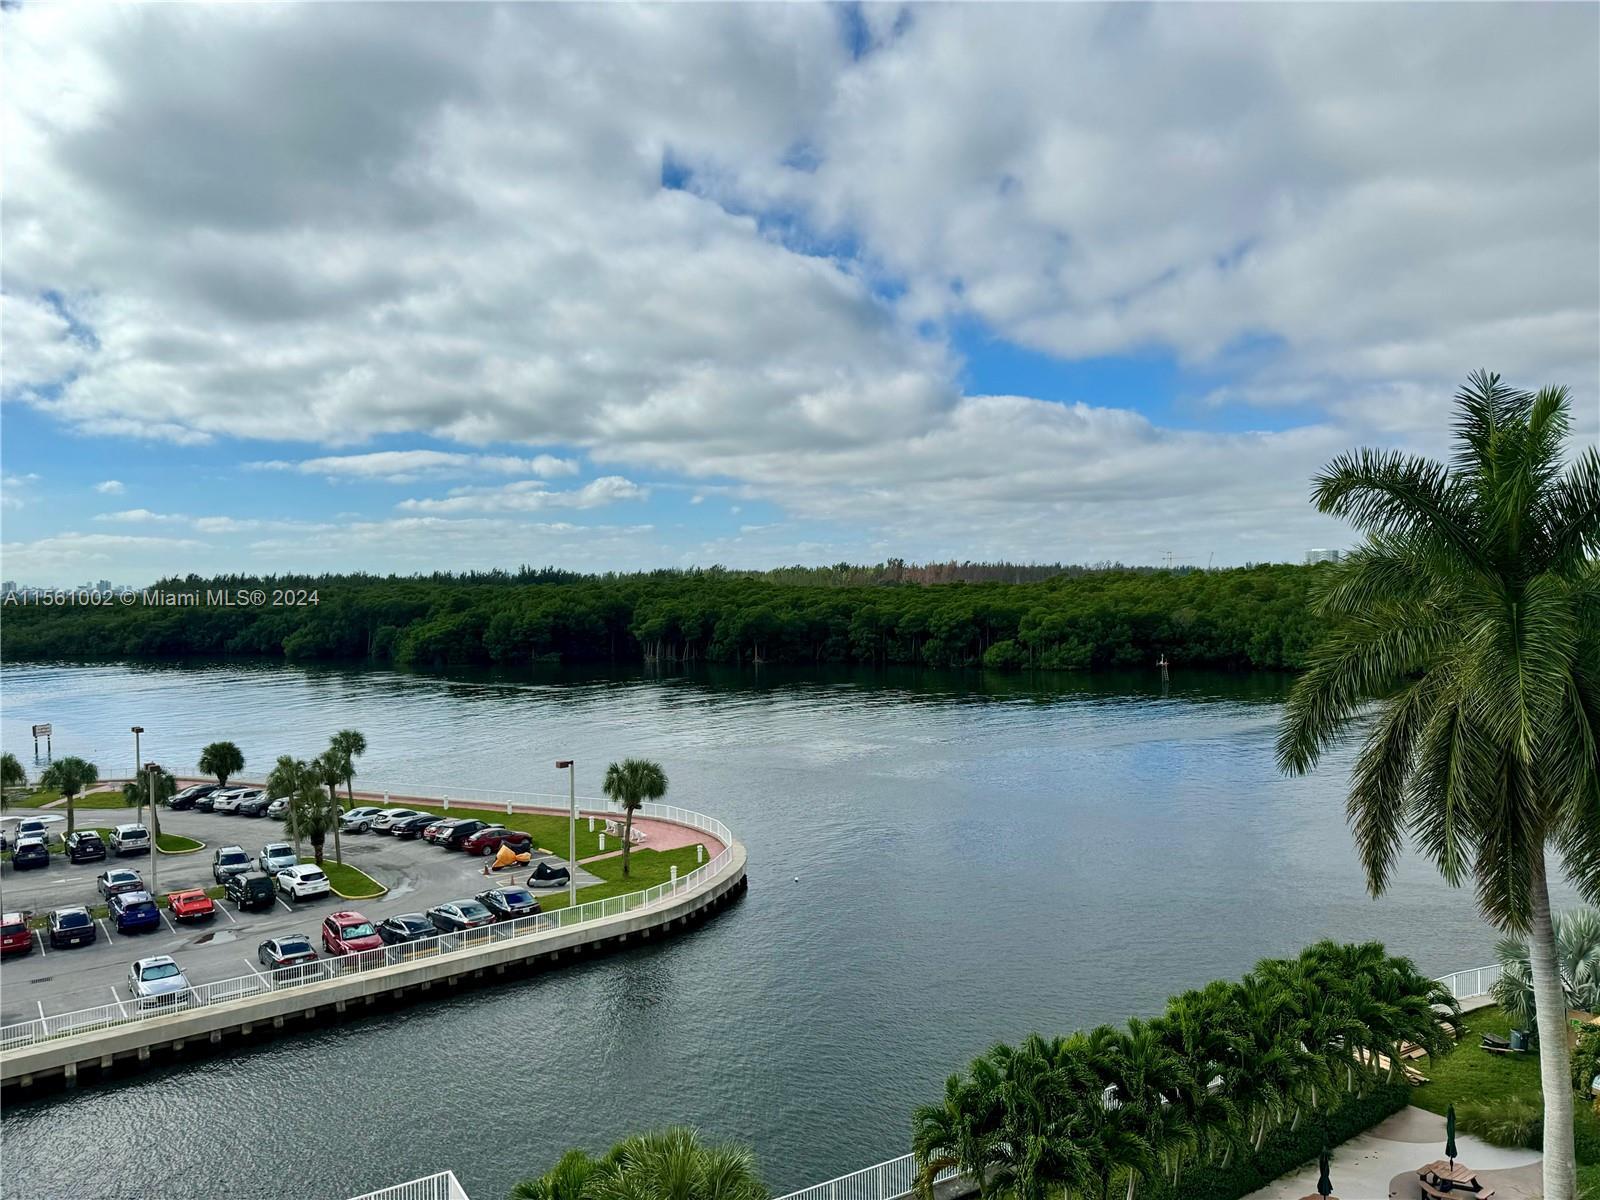 LOCATION! LOCATION! LOCATION! This one-bedroom, one-bathroom apartment in the heart of Sunny Isles B